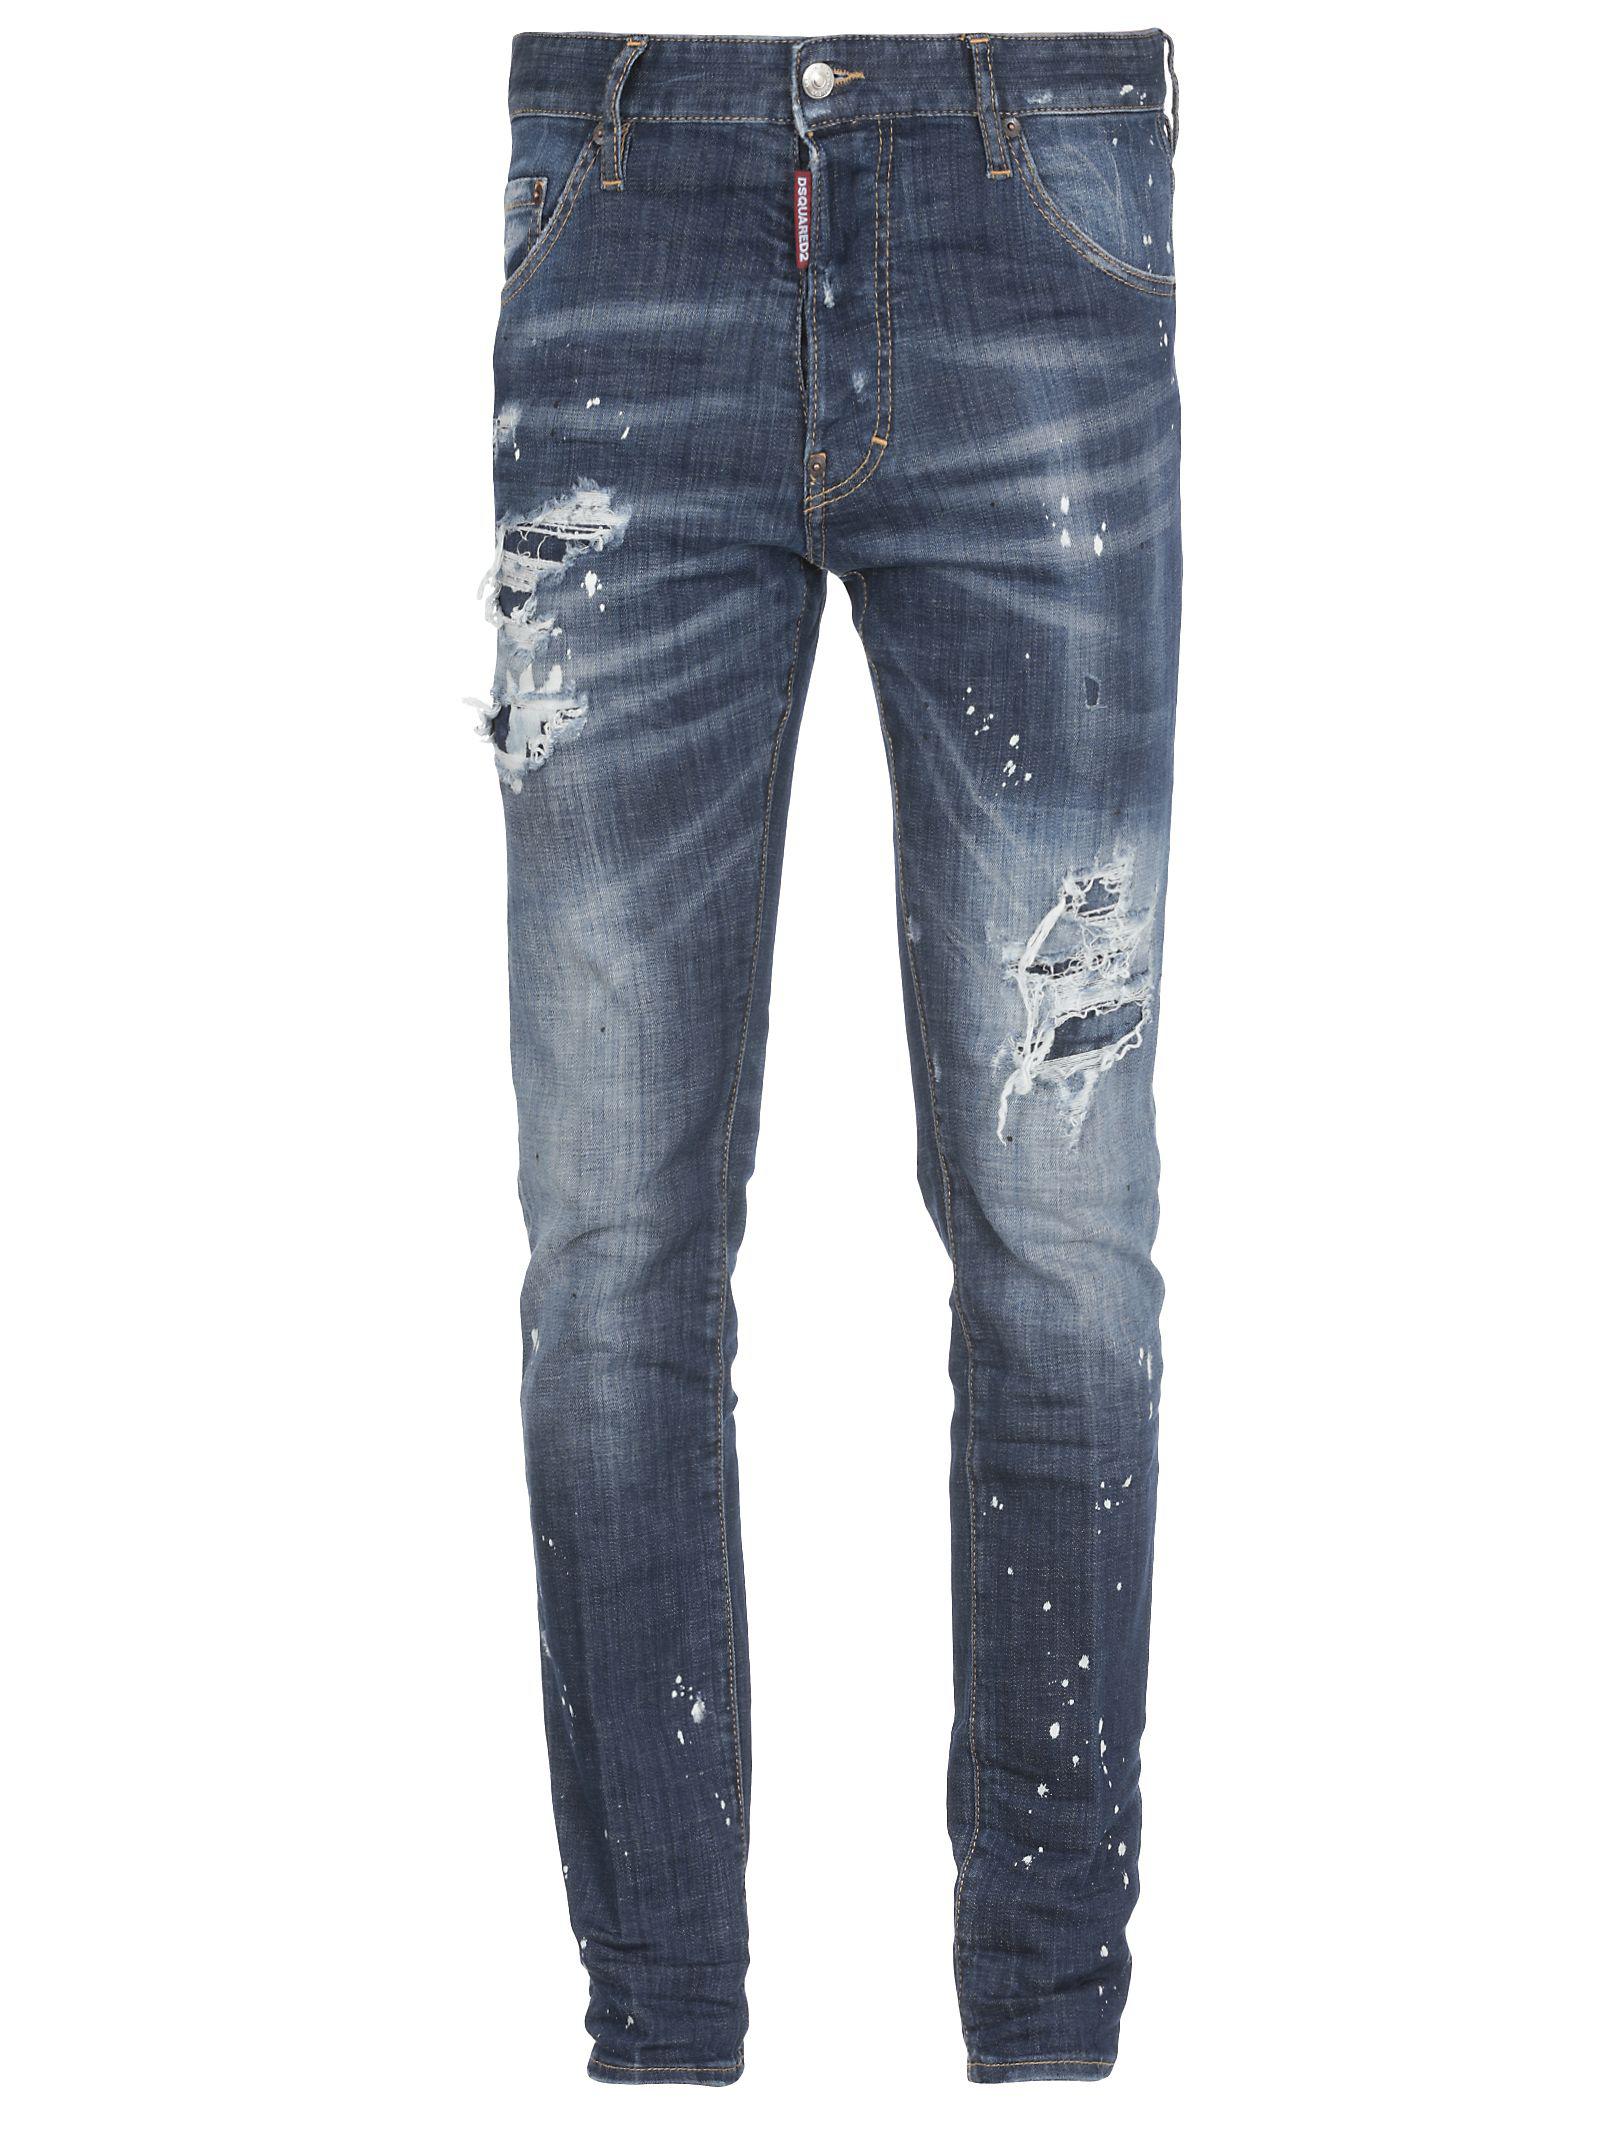 dsquared jeans cool guy jean